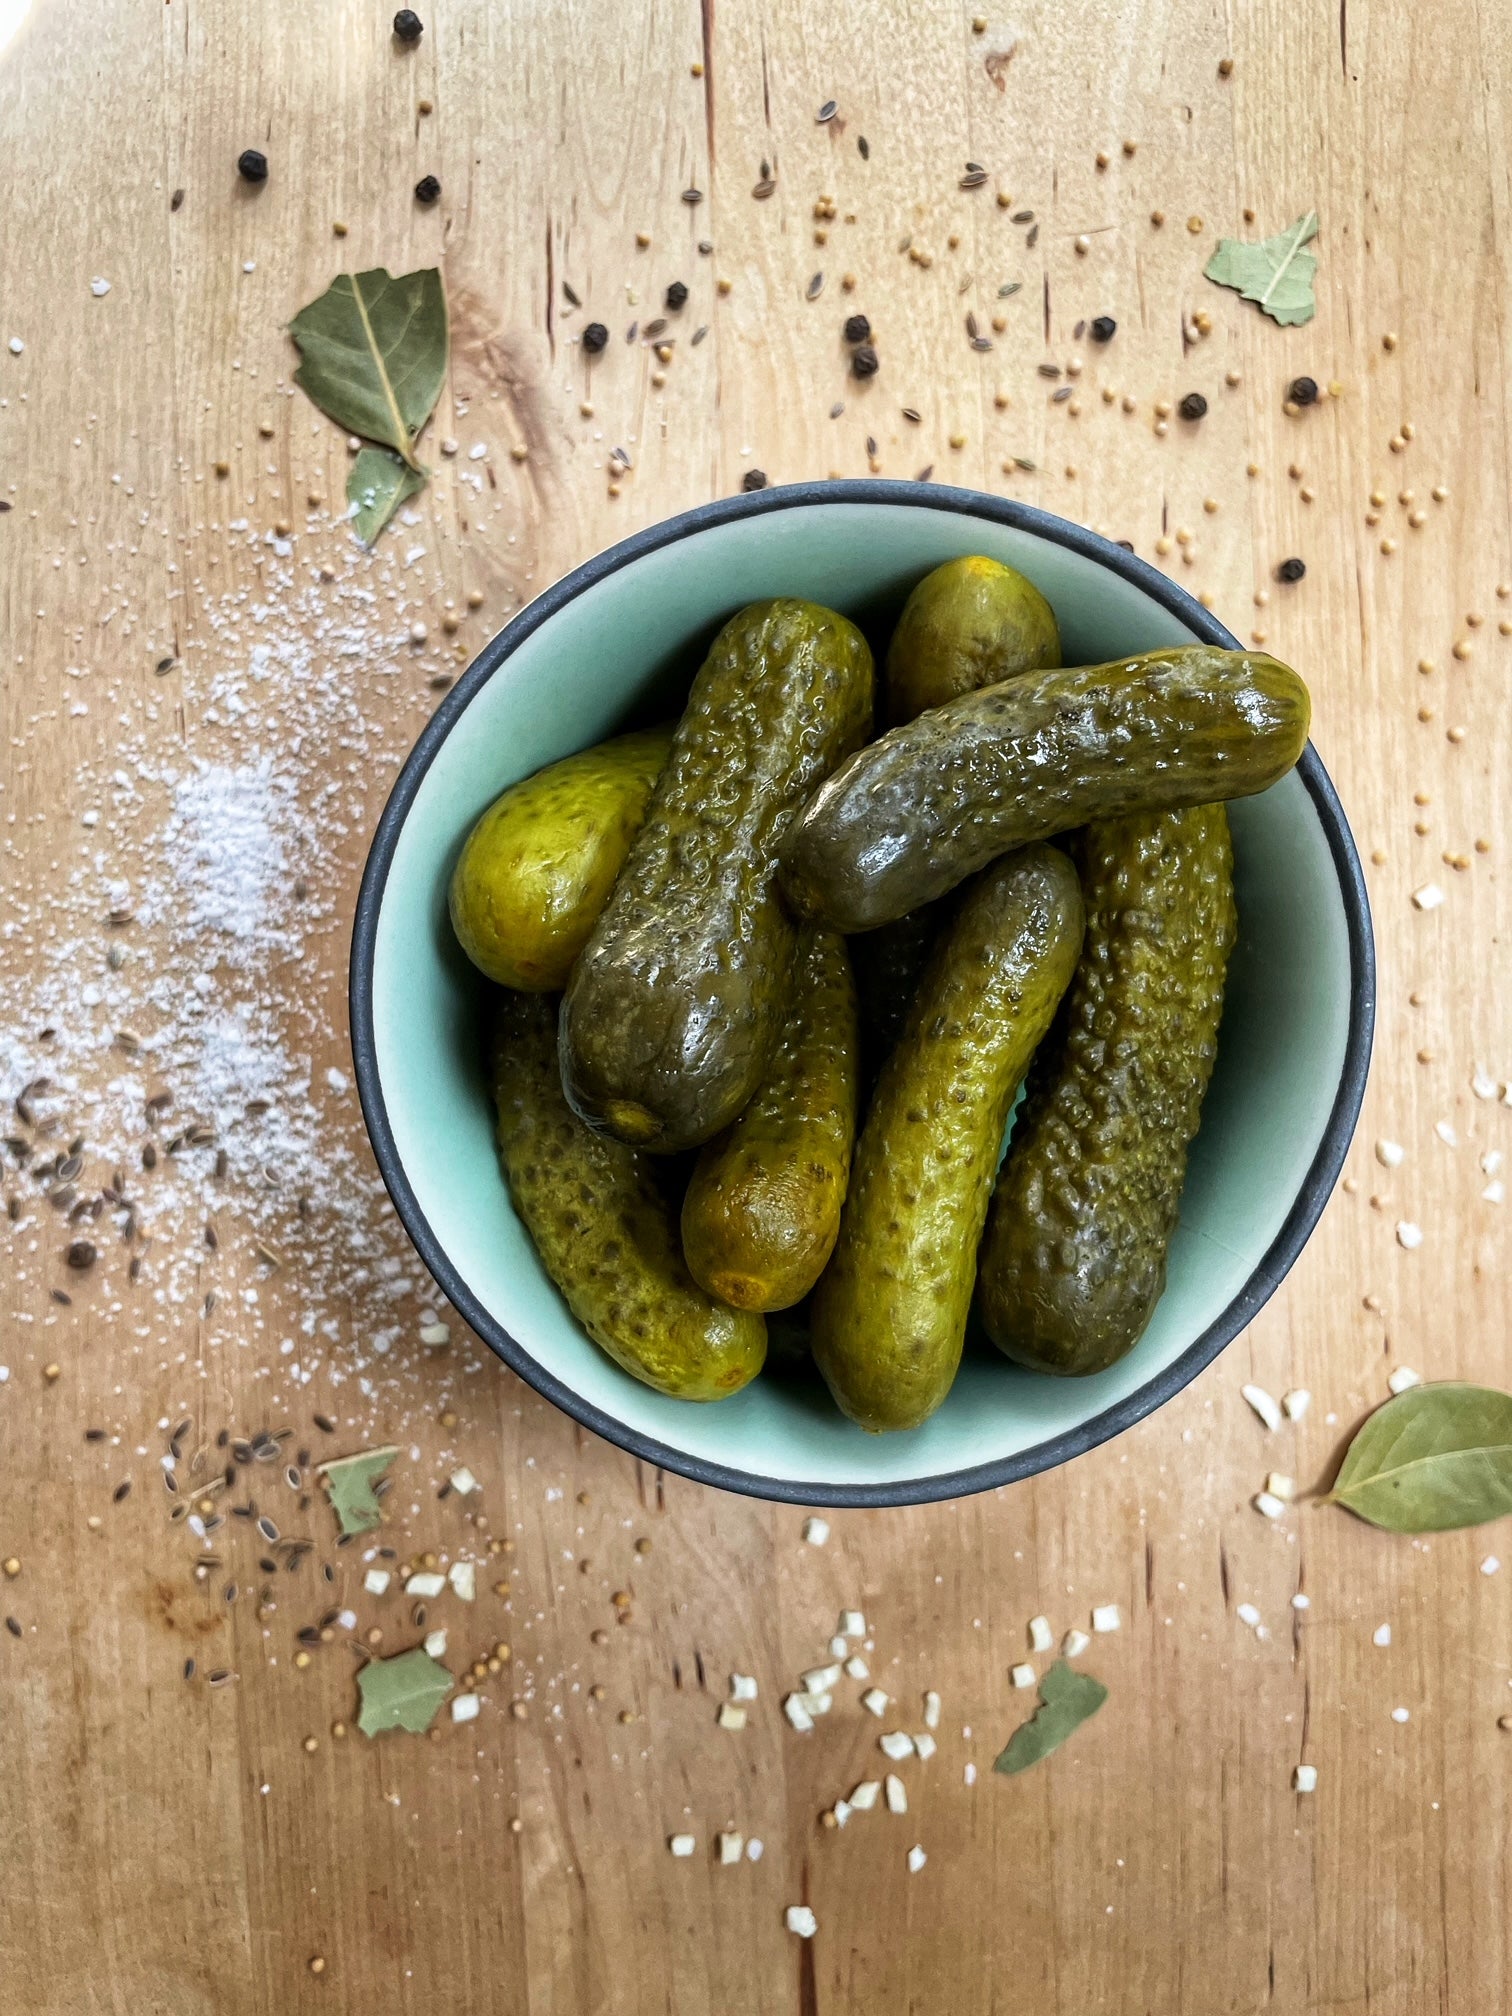 GOURMET PICKLE KIT- Make your own delicious pickles – MUST BEE COMPANY